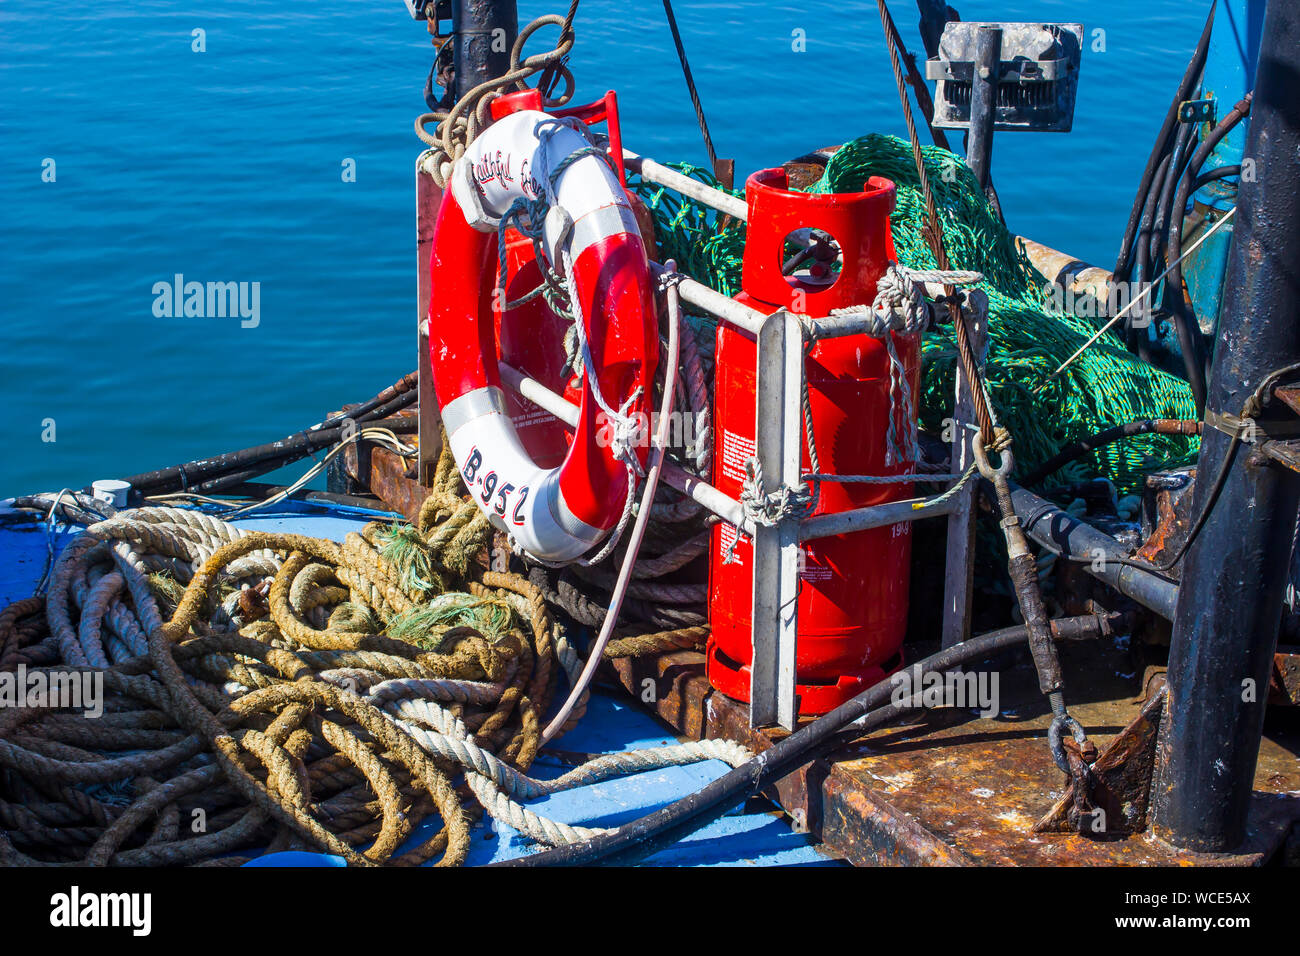 8 August 2019 The clutter stowed on the deck of a working trawler in berthed in Ardglass harbour County Down Northern Ireland Stock Photo